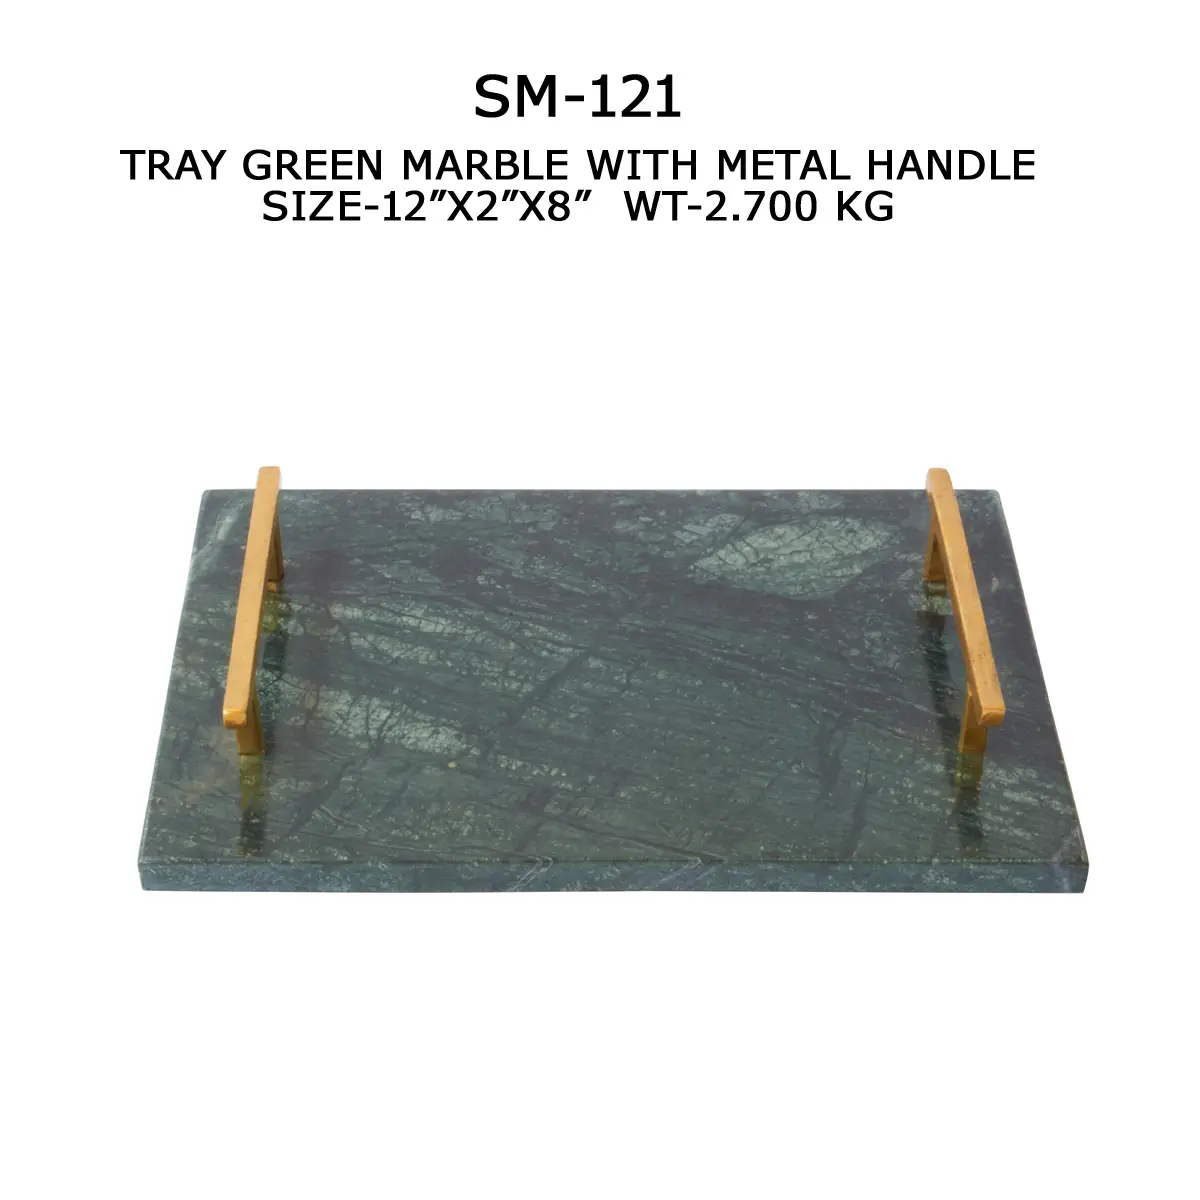 SERVING TRAY WITH METAL HANDLE GREEN
MARBLE